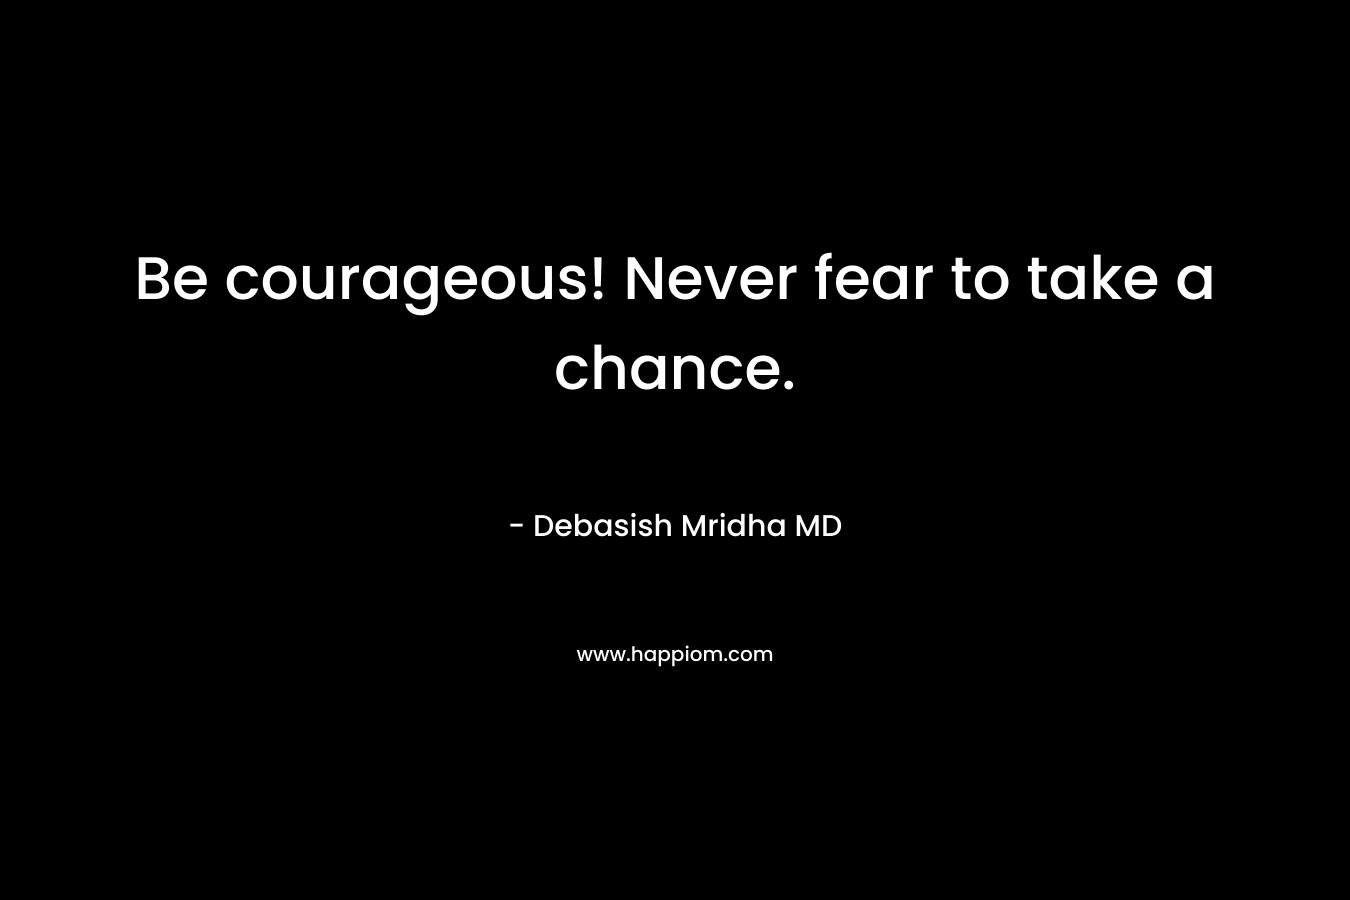 Be courageous! Never fear to take a chance.